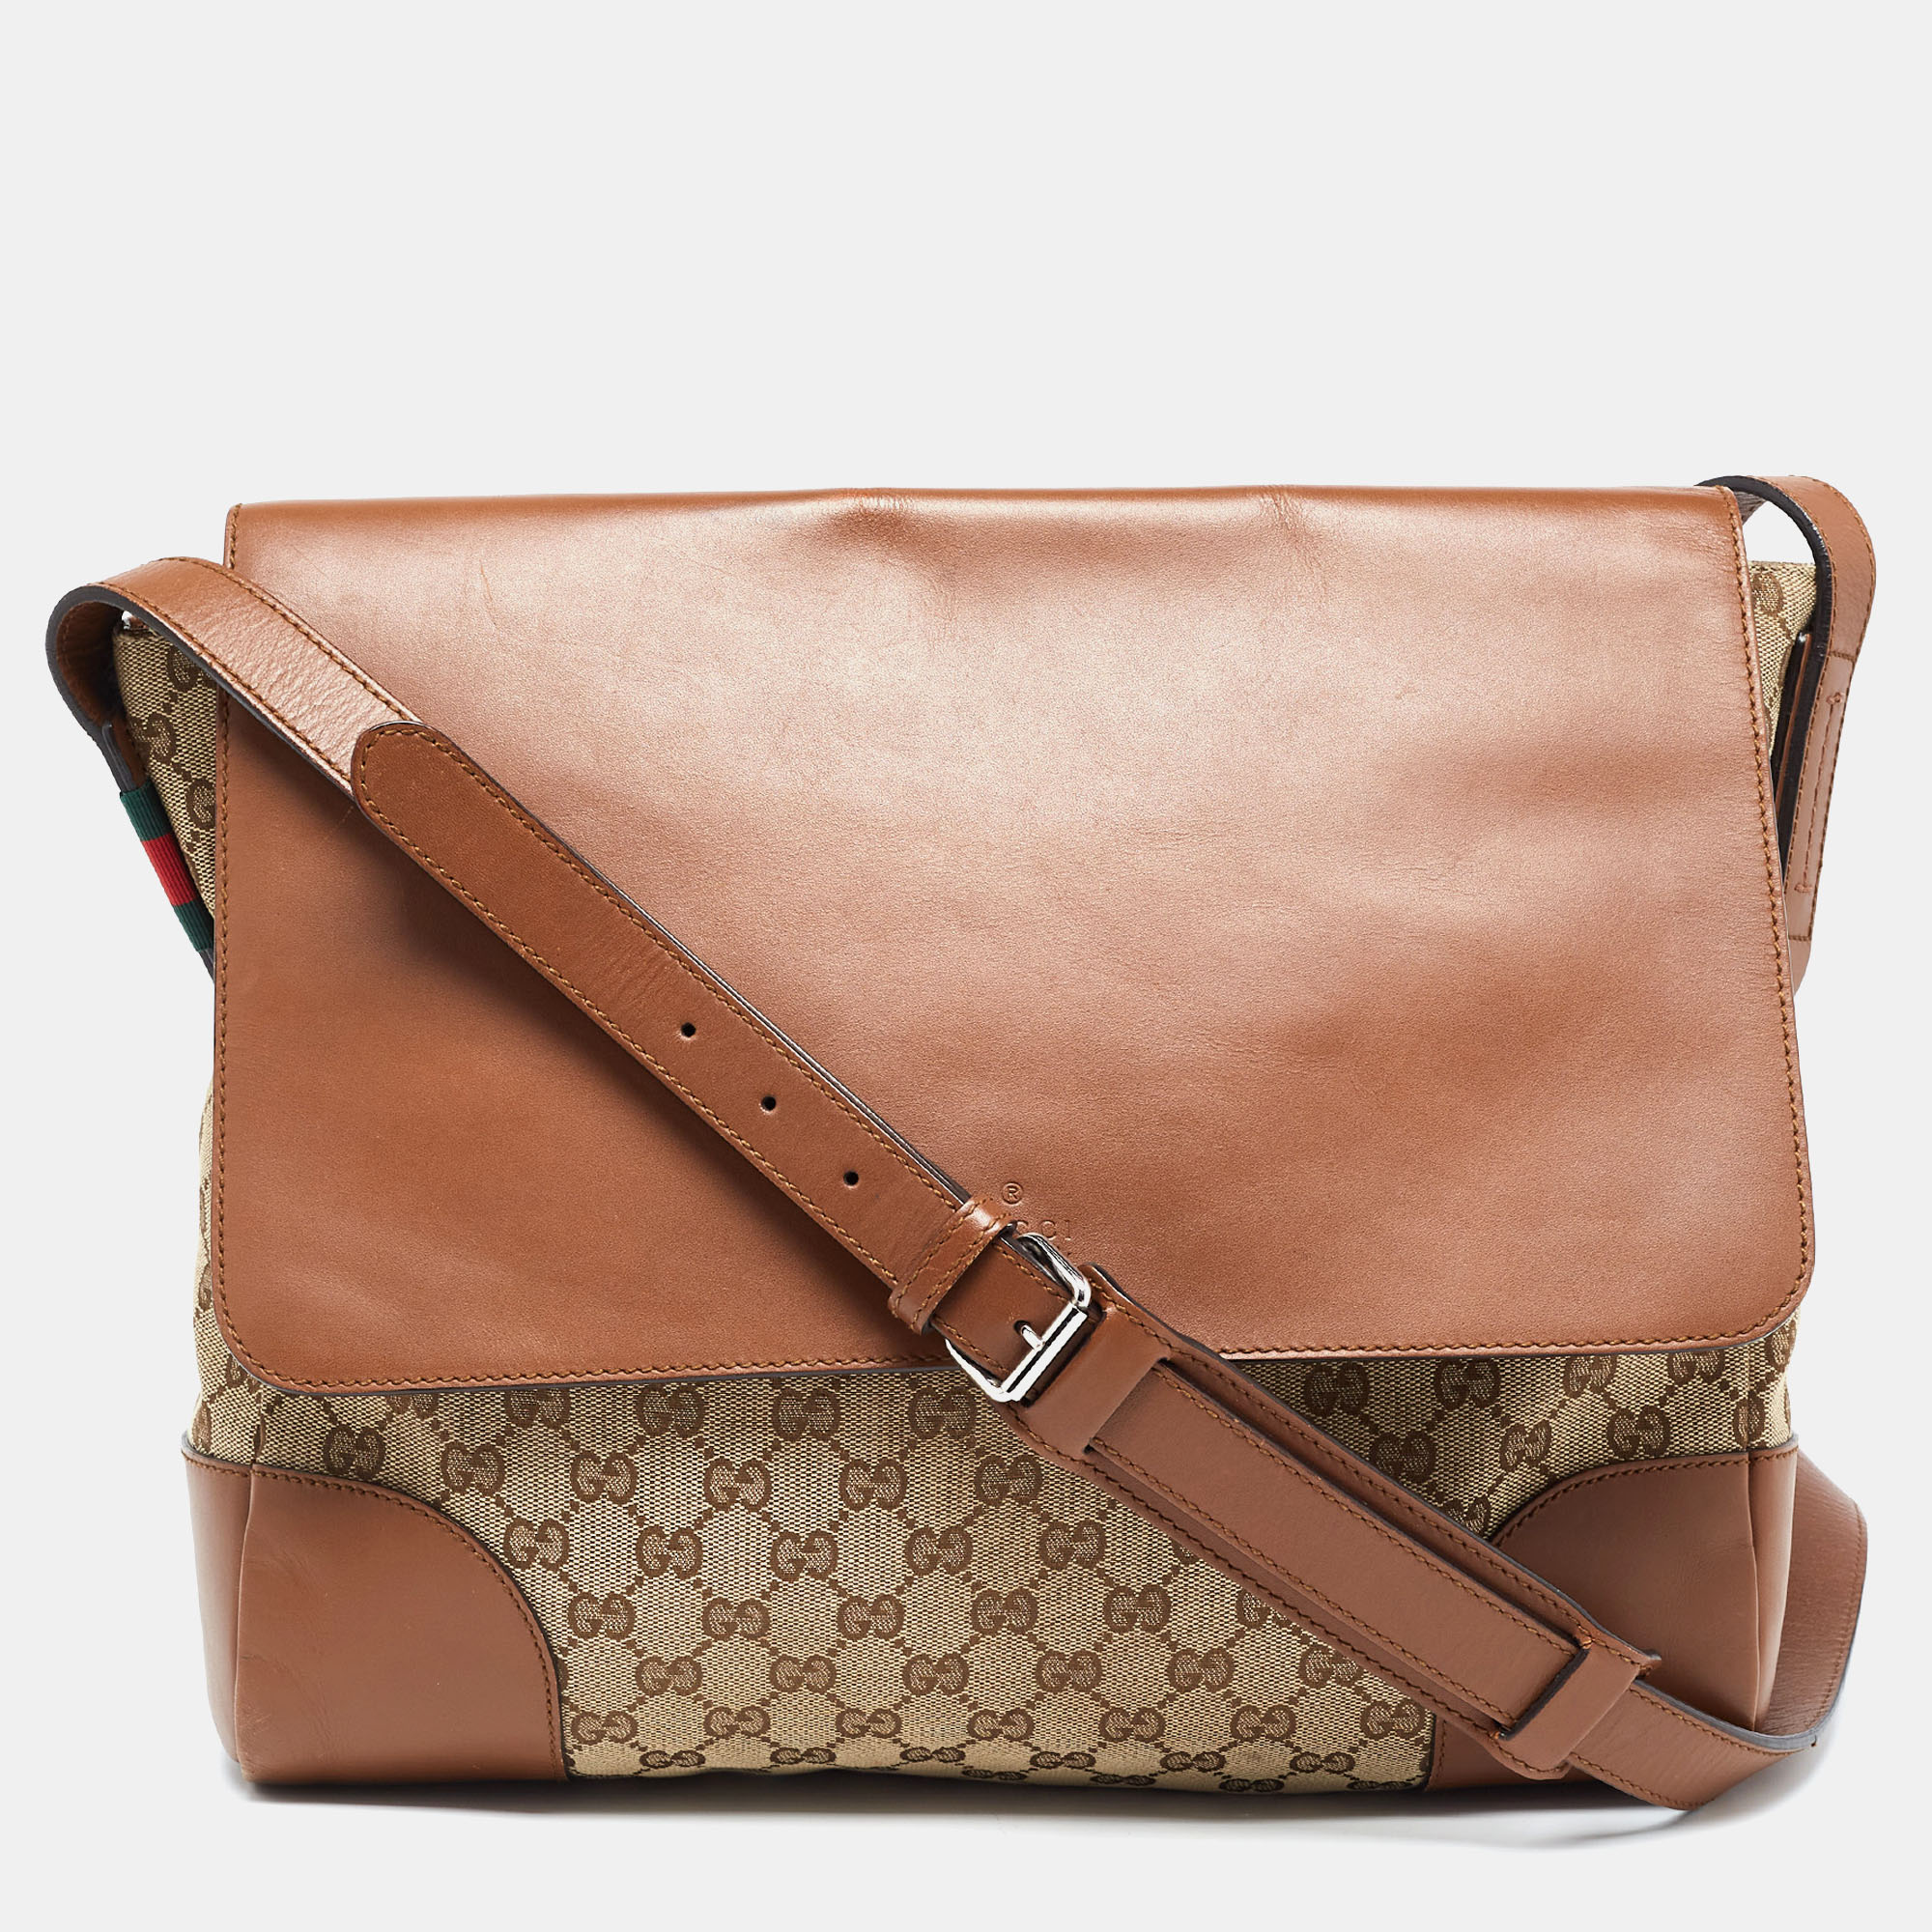 Gucci Brown/Beige GG Canvas And Leather Messenger Bag